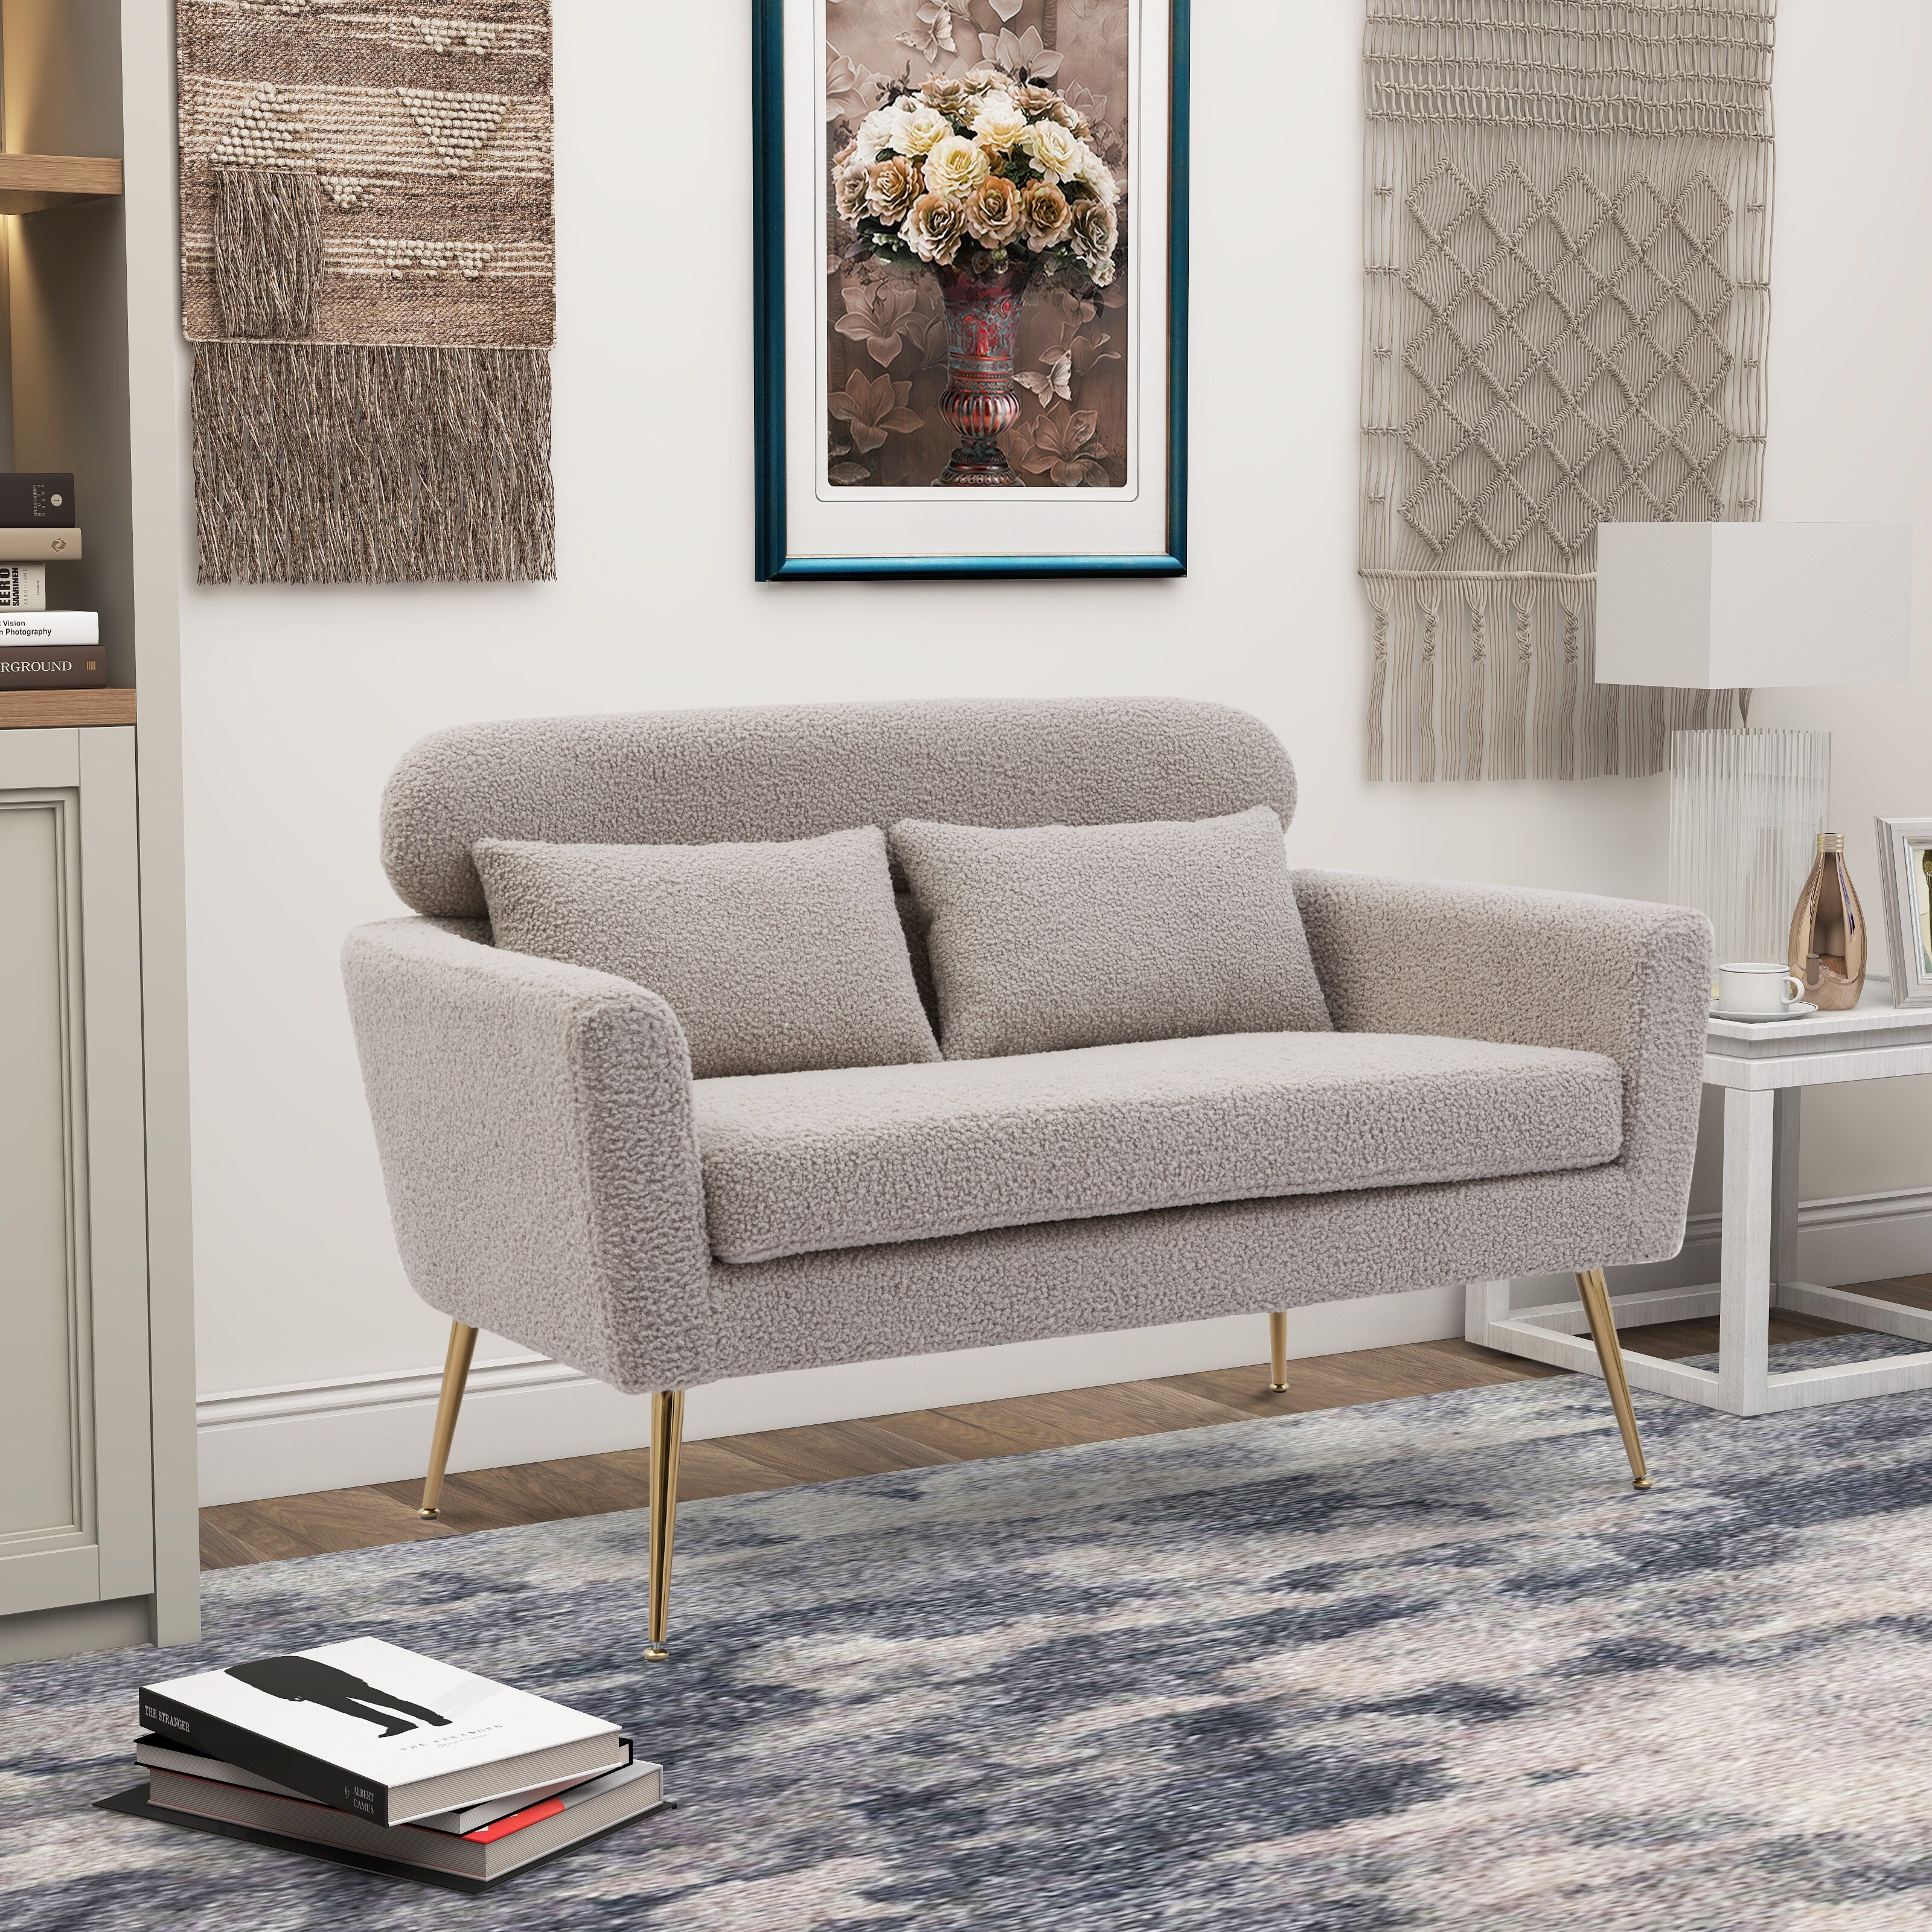 Boucle Loveseat Small Sofa Small Mini Room Couch Two-seater Sofa Padded Seat Arm Chairs with 2 Throw Pillows and Metal Legs